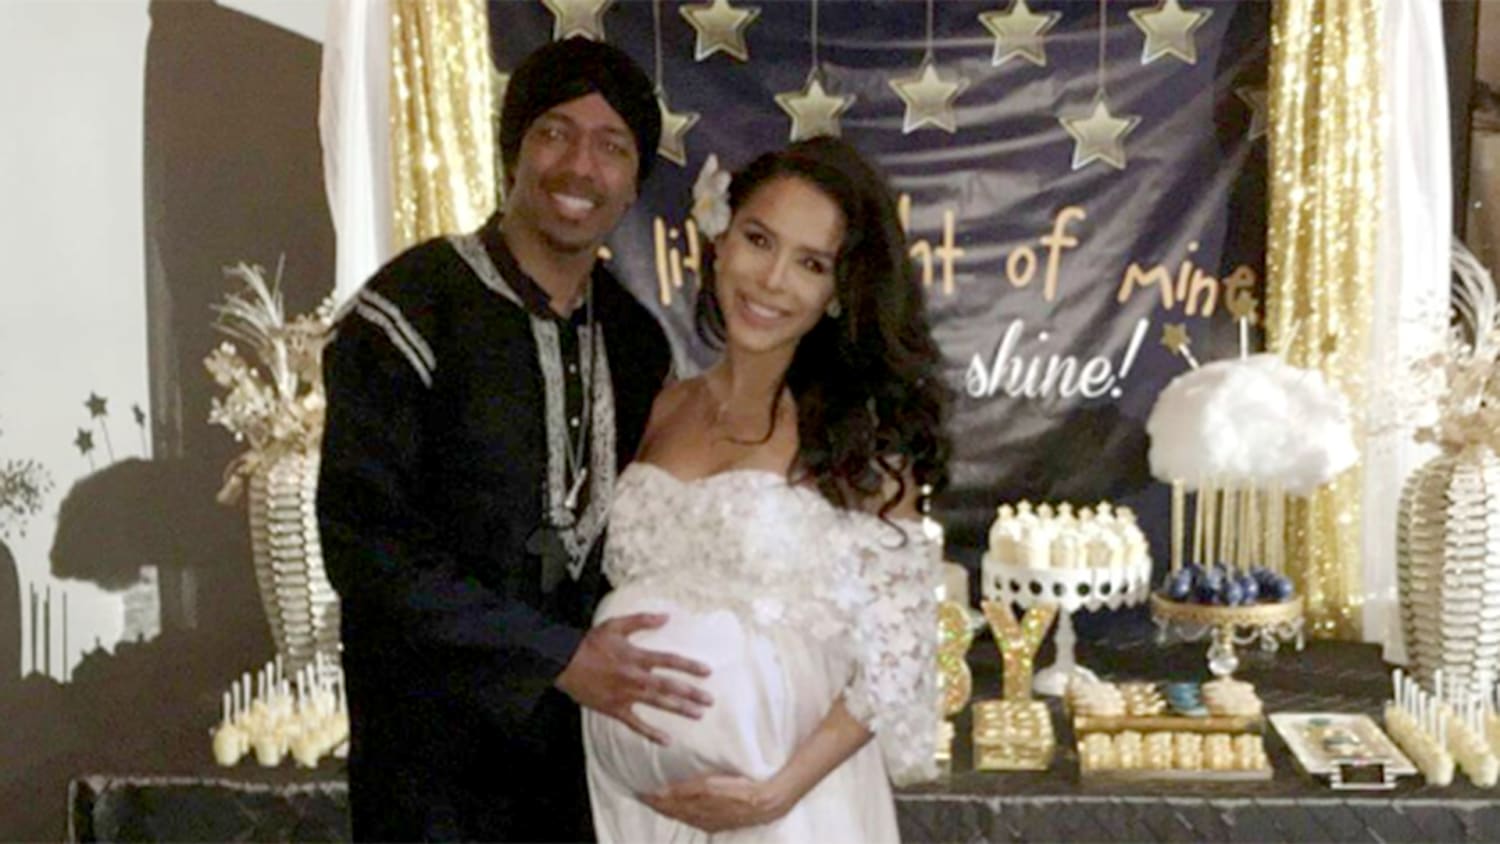 Nick Cannon welcomes son, Golden 'Sagon' Cannon, with Brittany Bell - TODAY.com1920 x 1080